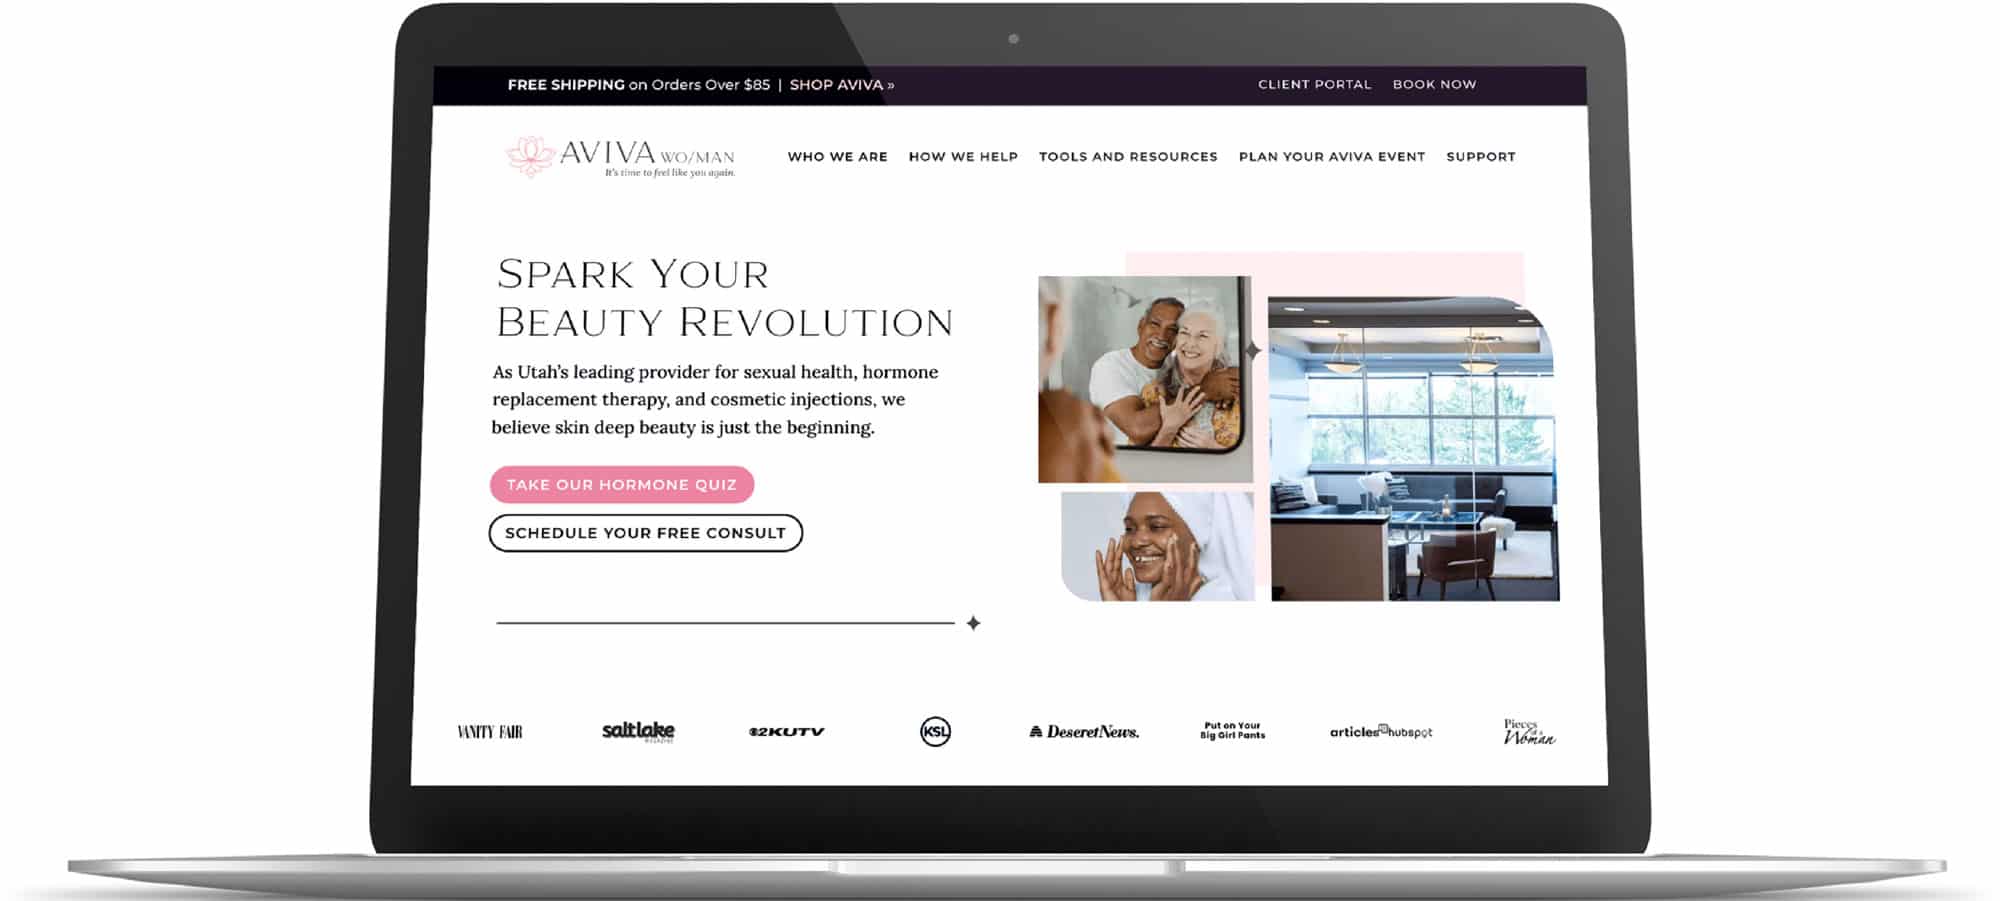 AVIVA Woman WordPress website design for health and wellness med spa shown on a front facing laptop